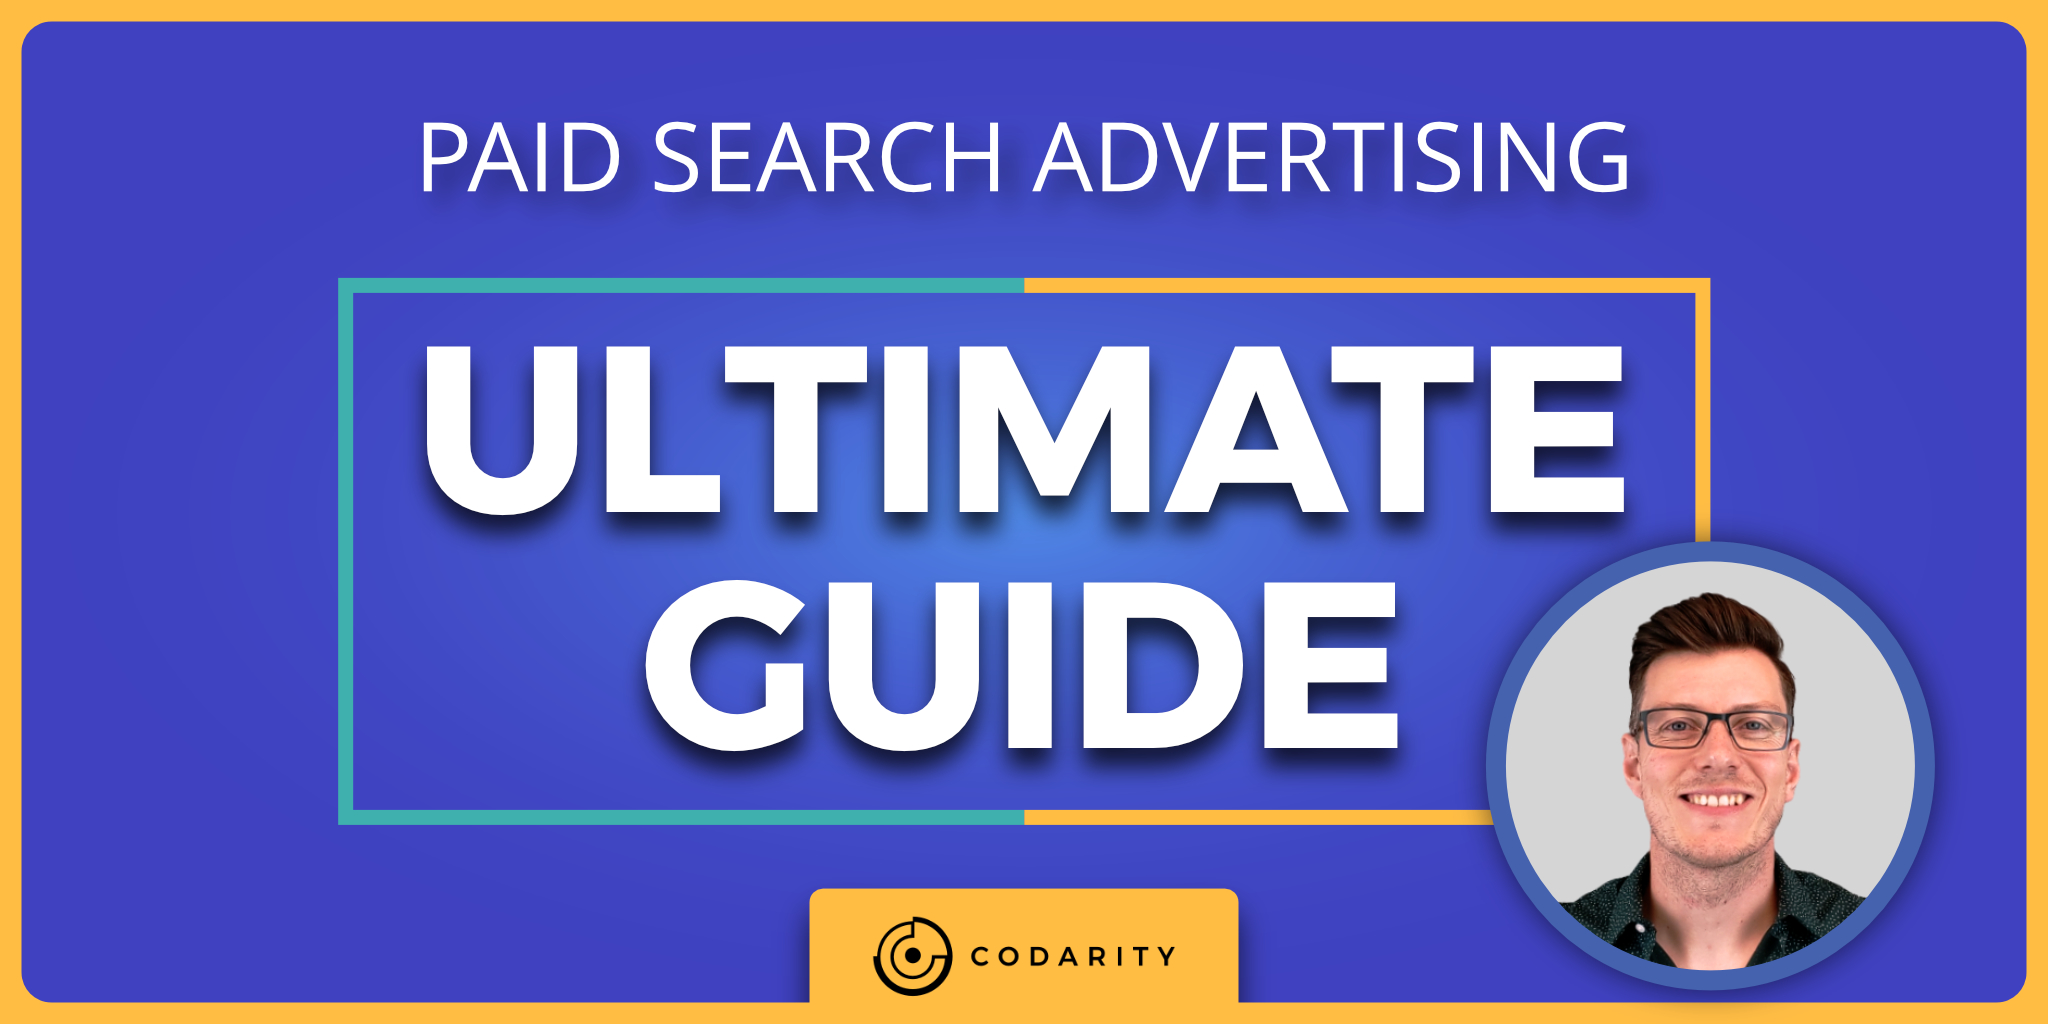 Featured image for “Ultimate Guide To Paid Search Advertising”